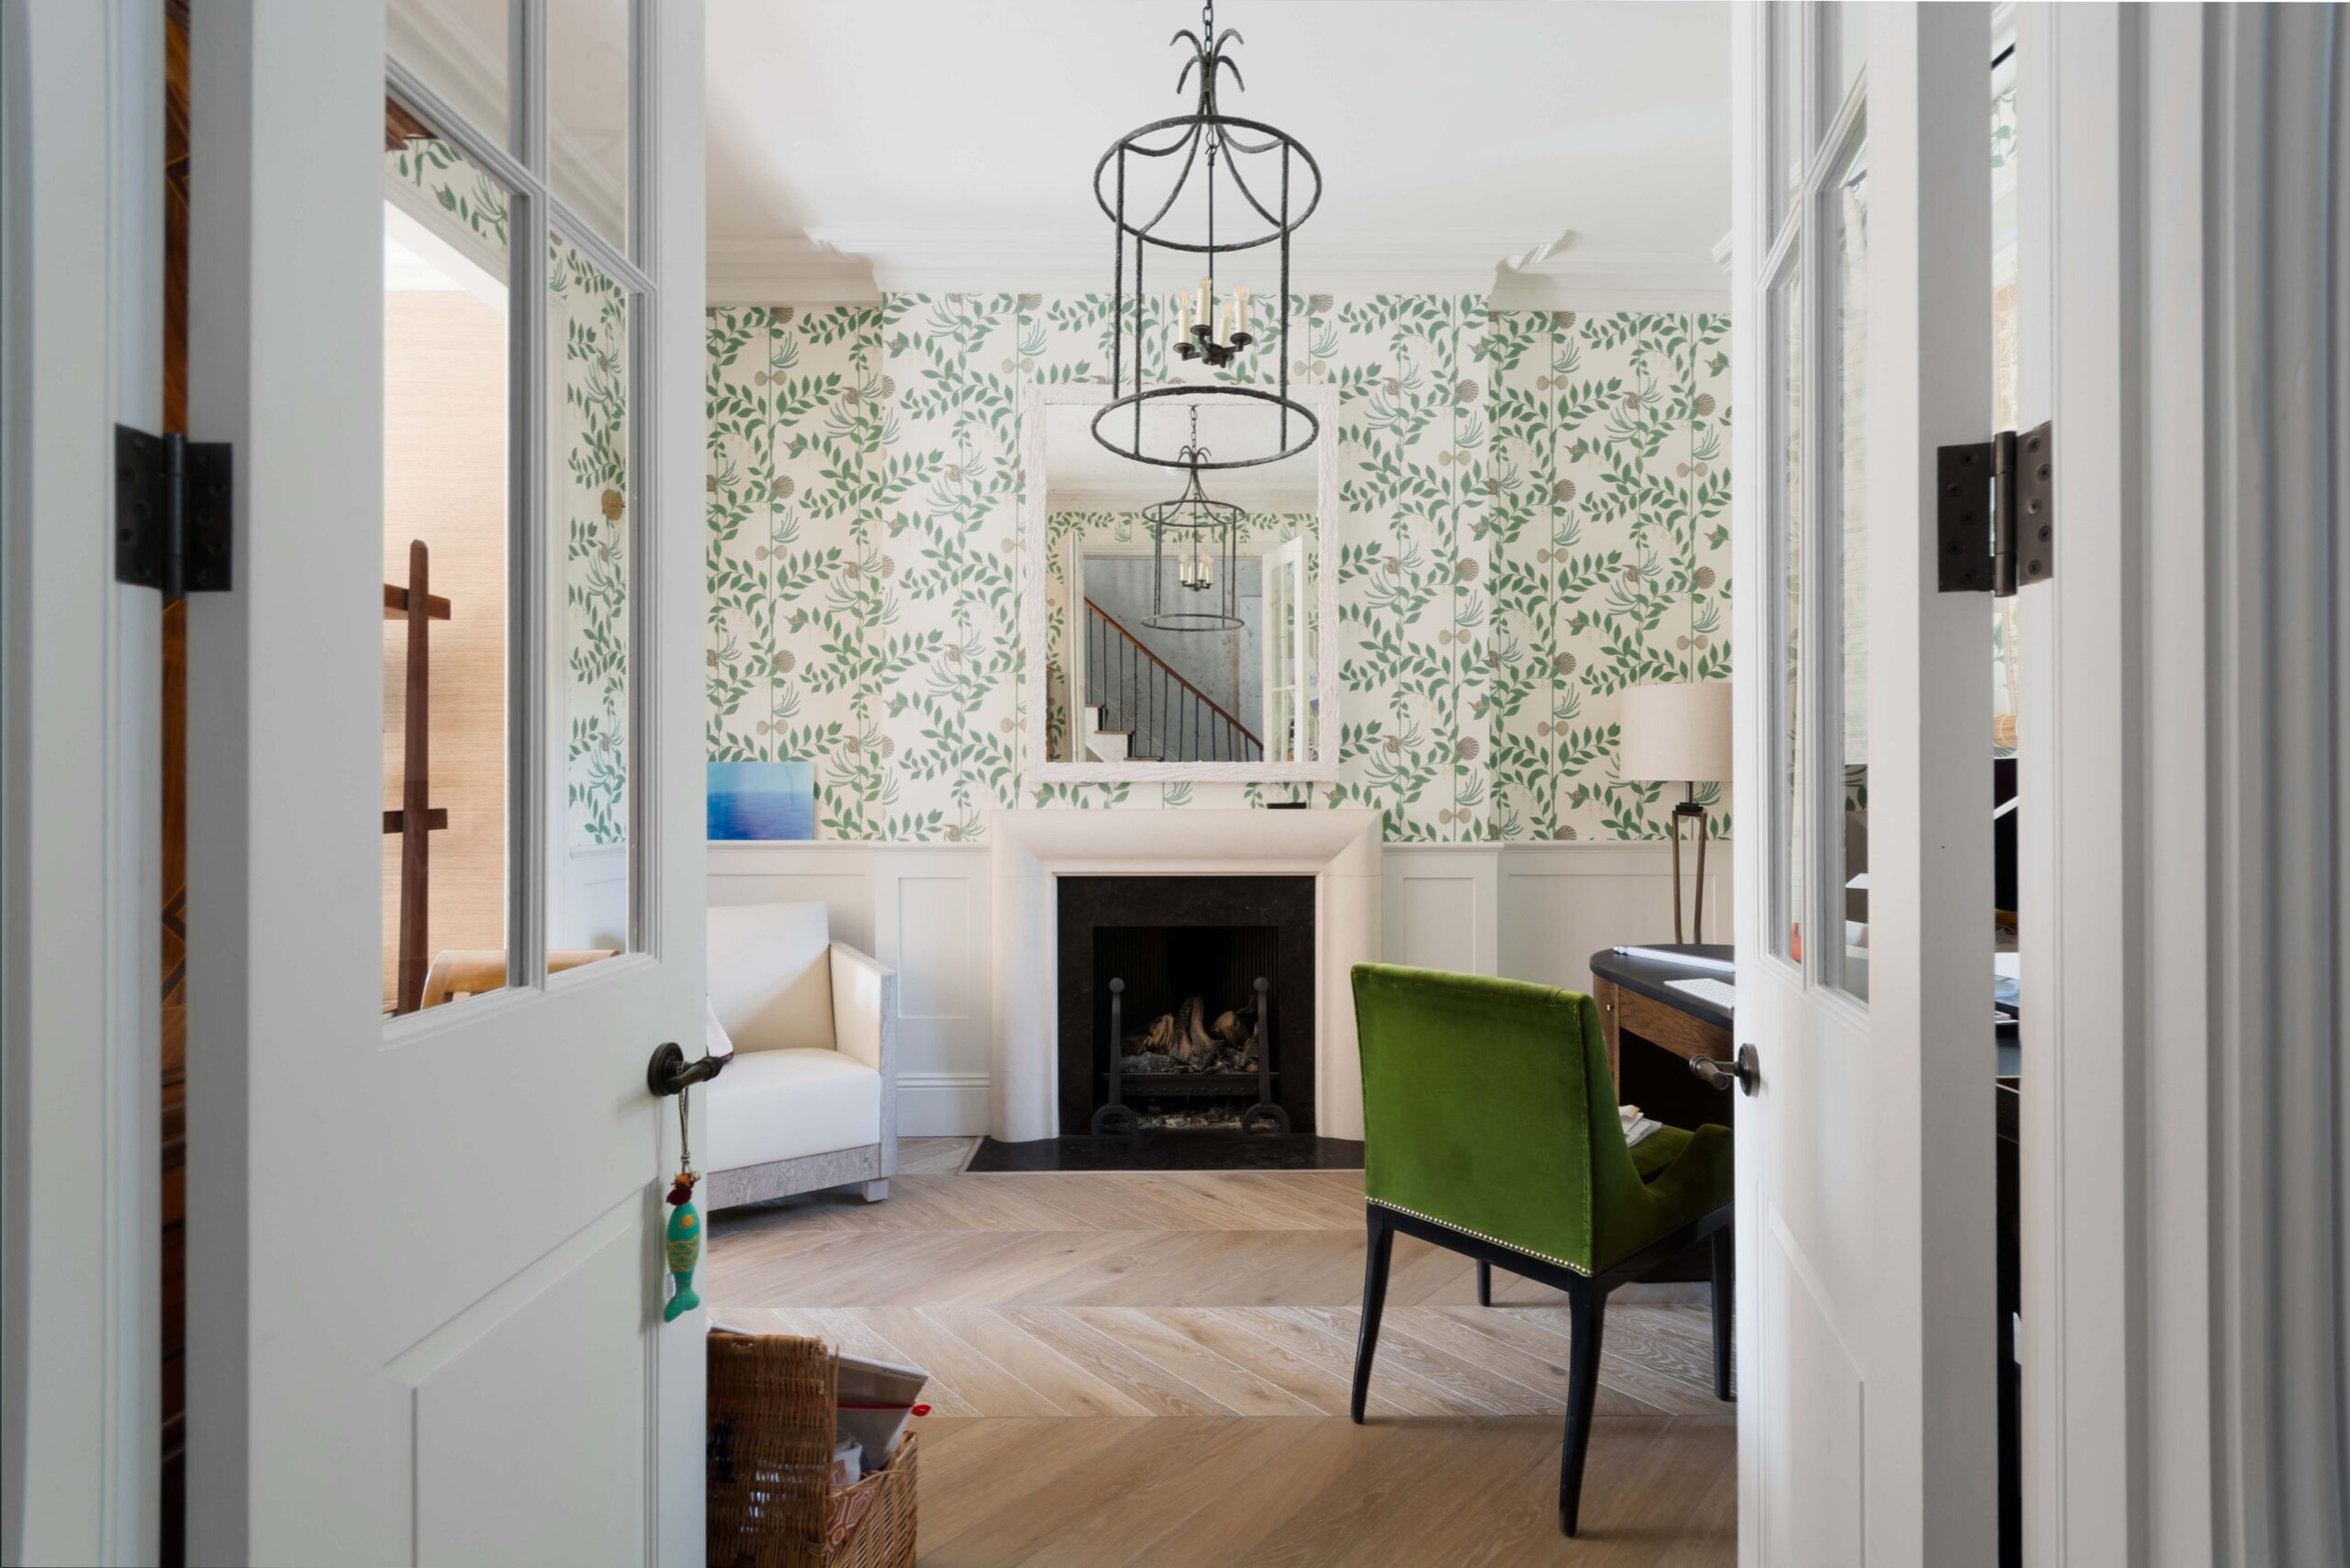 Hammersmith Grove W6 reception room with botanical wallpaper and double doors